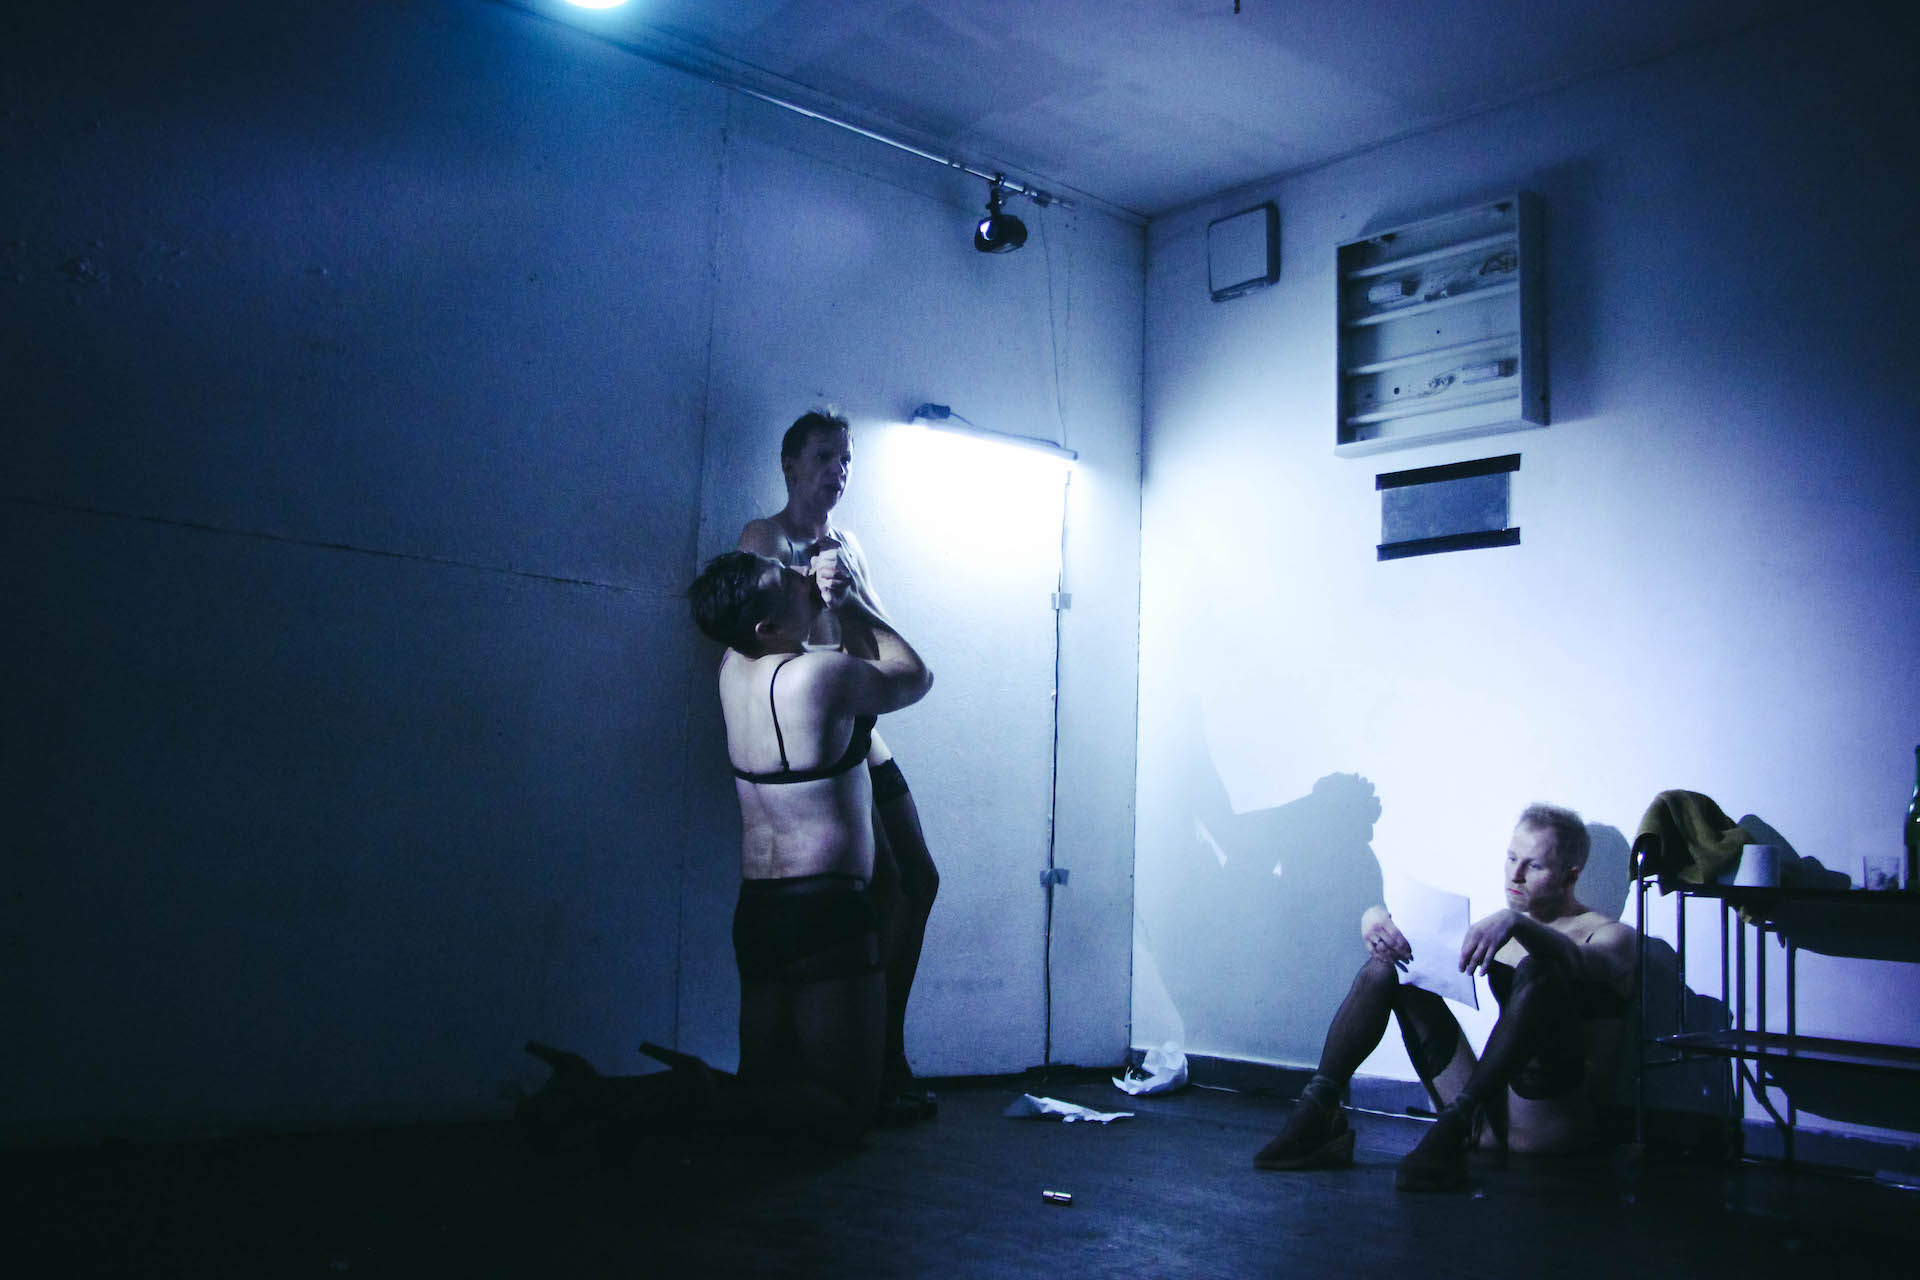 Three performers in a dark blue lighted room. They are wearing a bra, pantyhose and high heels. One on the right is sitting on the floor leaned against the wall, reading something from piece of paper. Two performers are on the left. One is kneeling down and kissing the hand of the other one standing, as if they are praying.